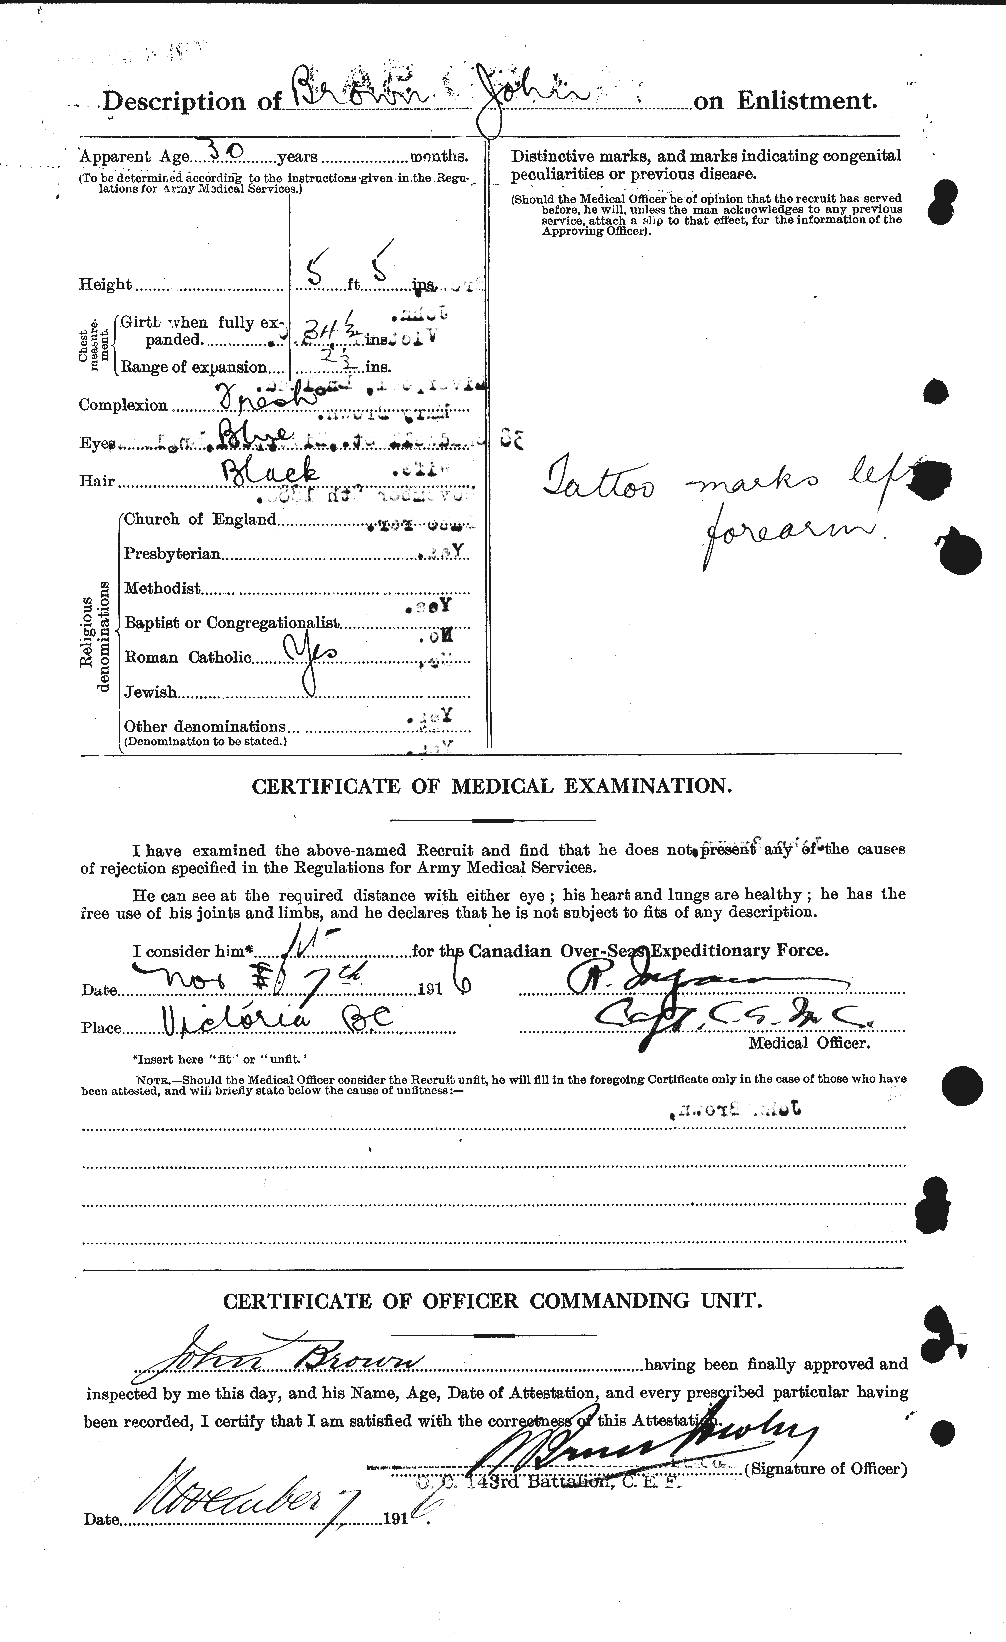 Personnel Records of the First World War - CEF 264535b